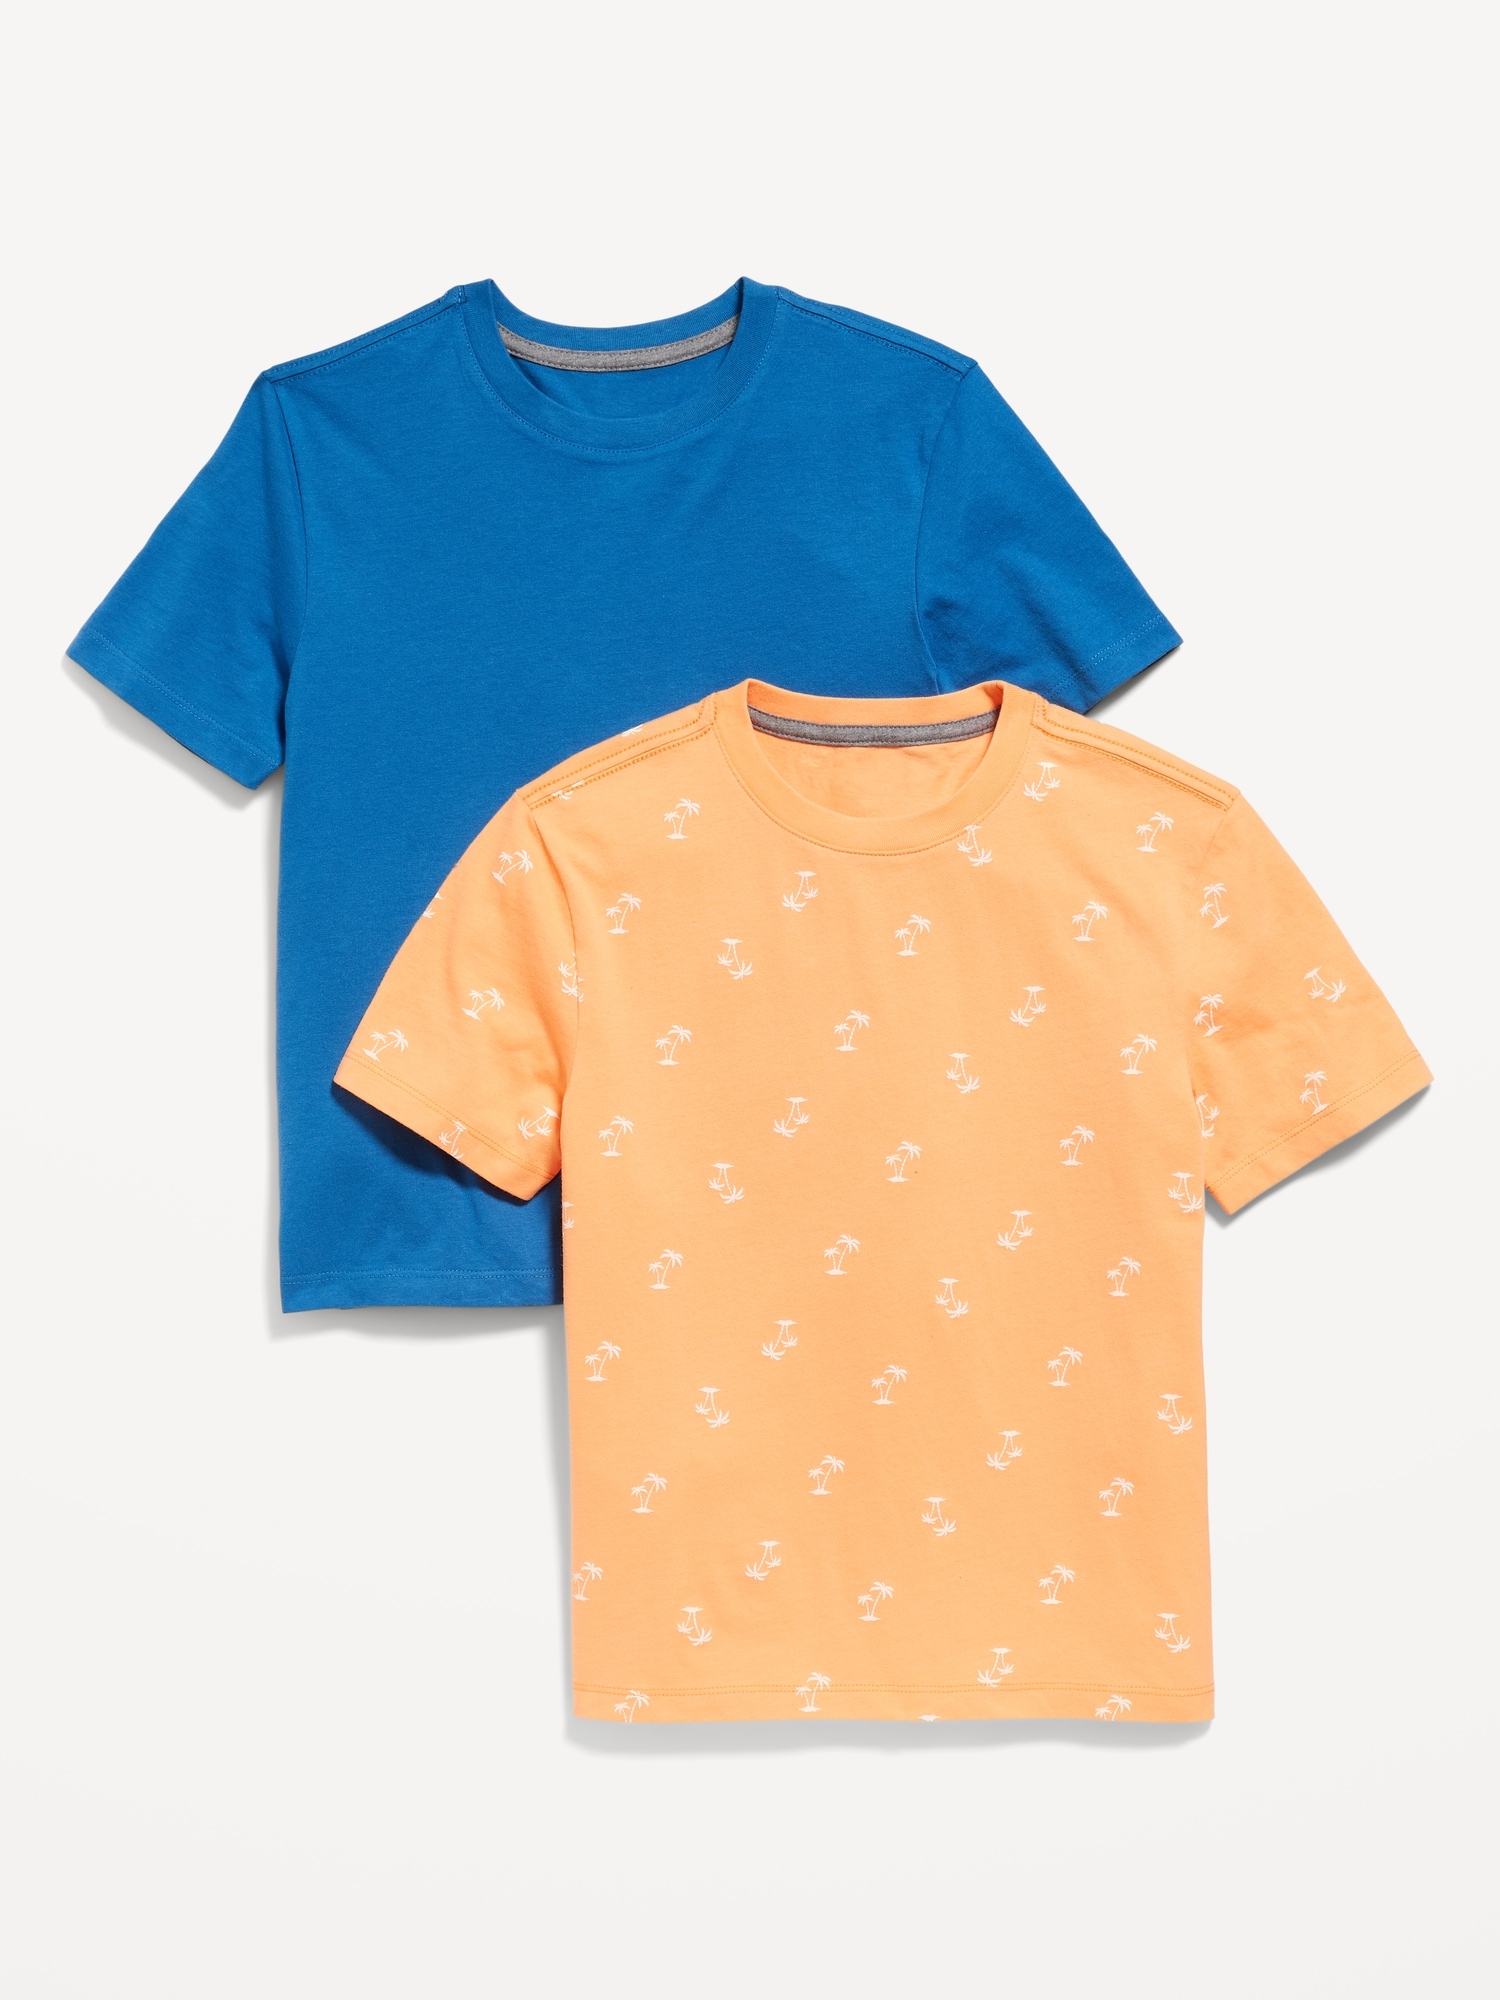 Old Navy Softest Crew-Neck T-Shirt 2-Pack For Boys blue. 1